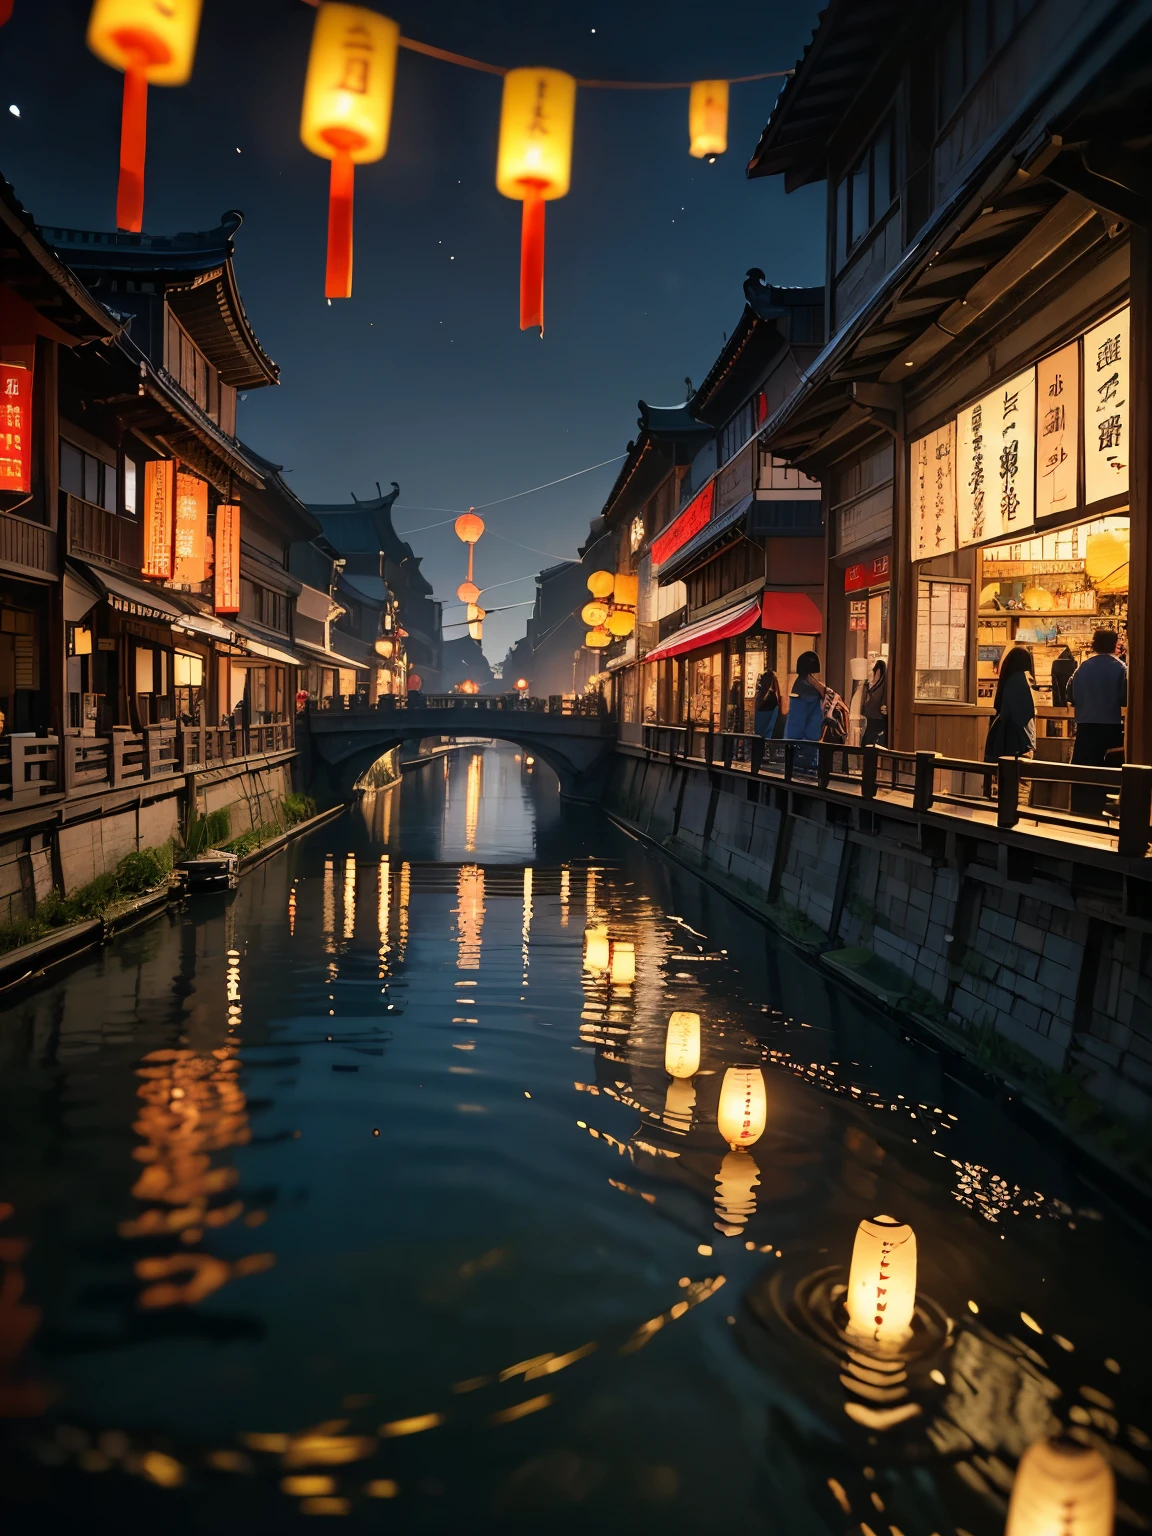 (8K, highest quality, masterpiece)，(Realistic, RAW Photos, Super Fine Clear), Realistic Light, Lantern Festival in Tainan, no peoples, lake side, traditional chinese wooden buildings, (fly many lanterns into the night sky:1.2)